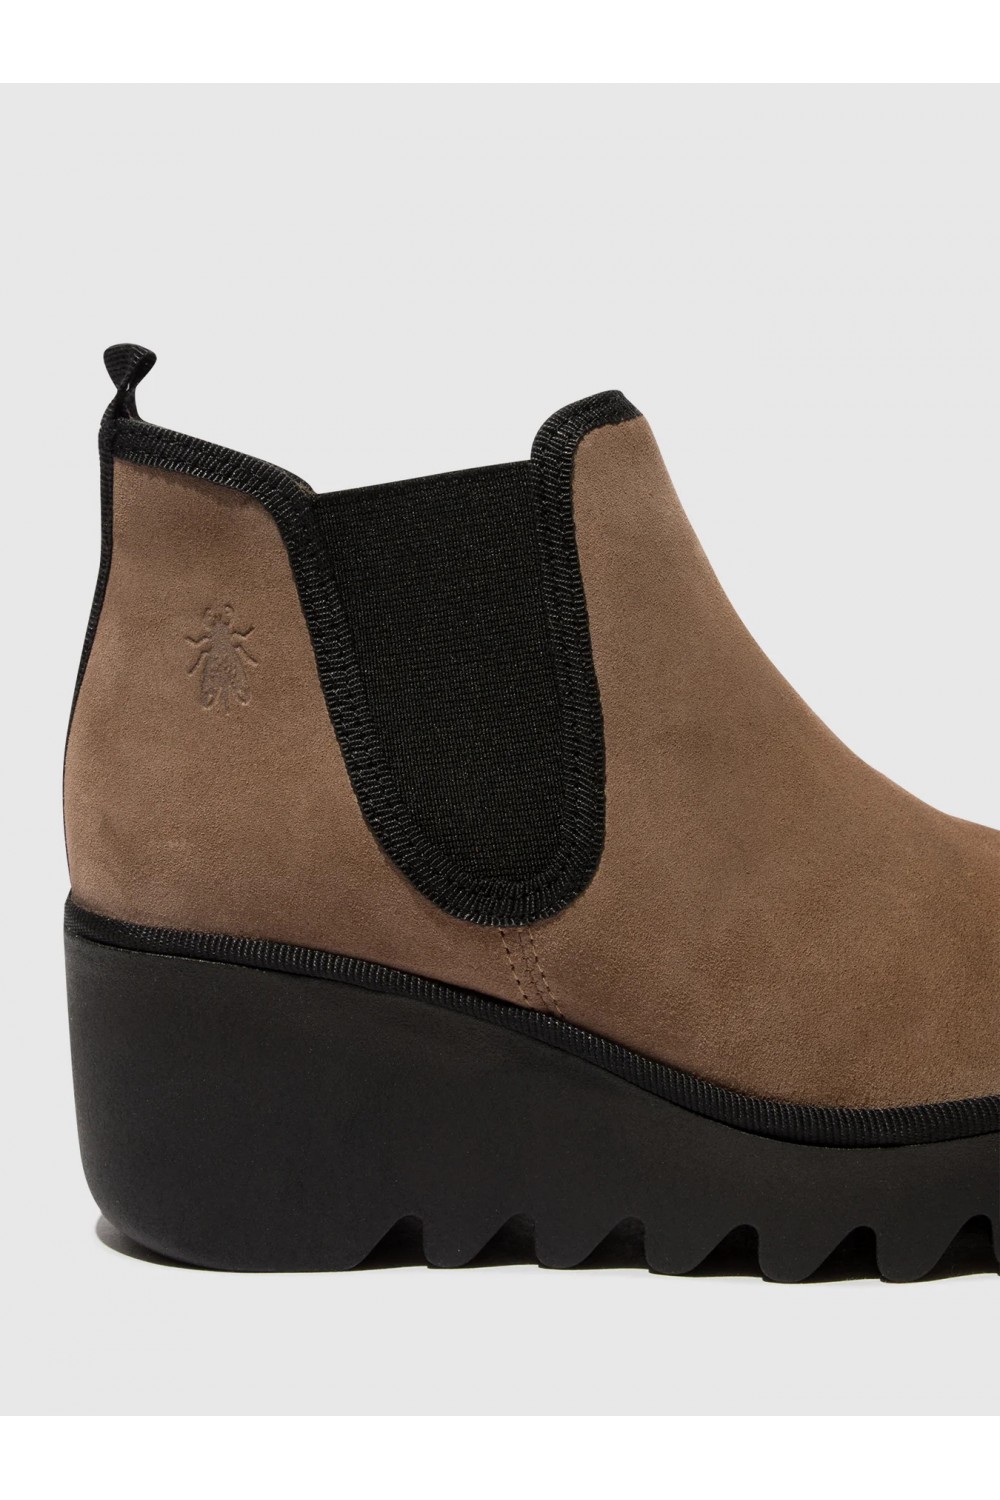 FLY LONDON Byne349 Oiled Suede Wedge Pull On Ankle Boot Taupe